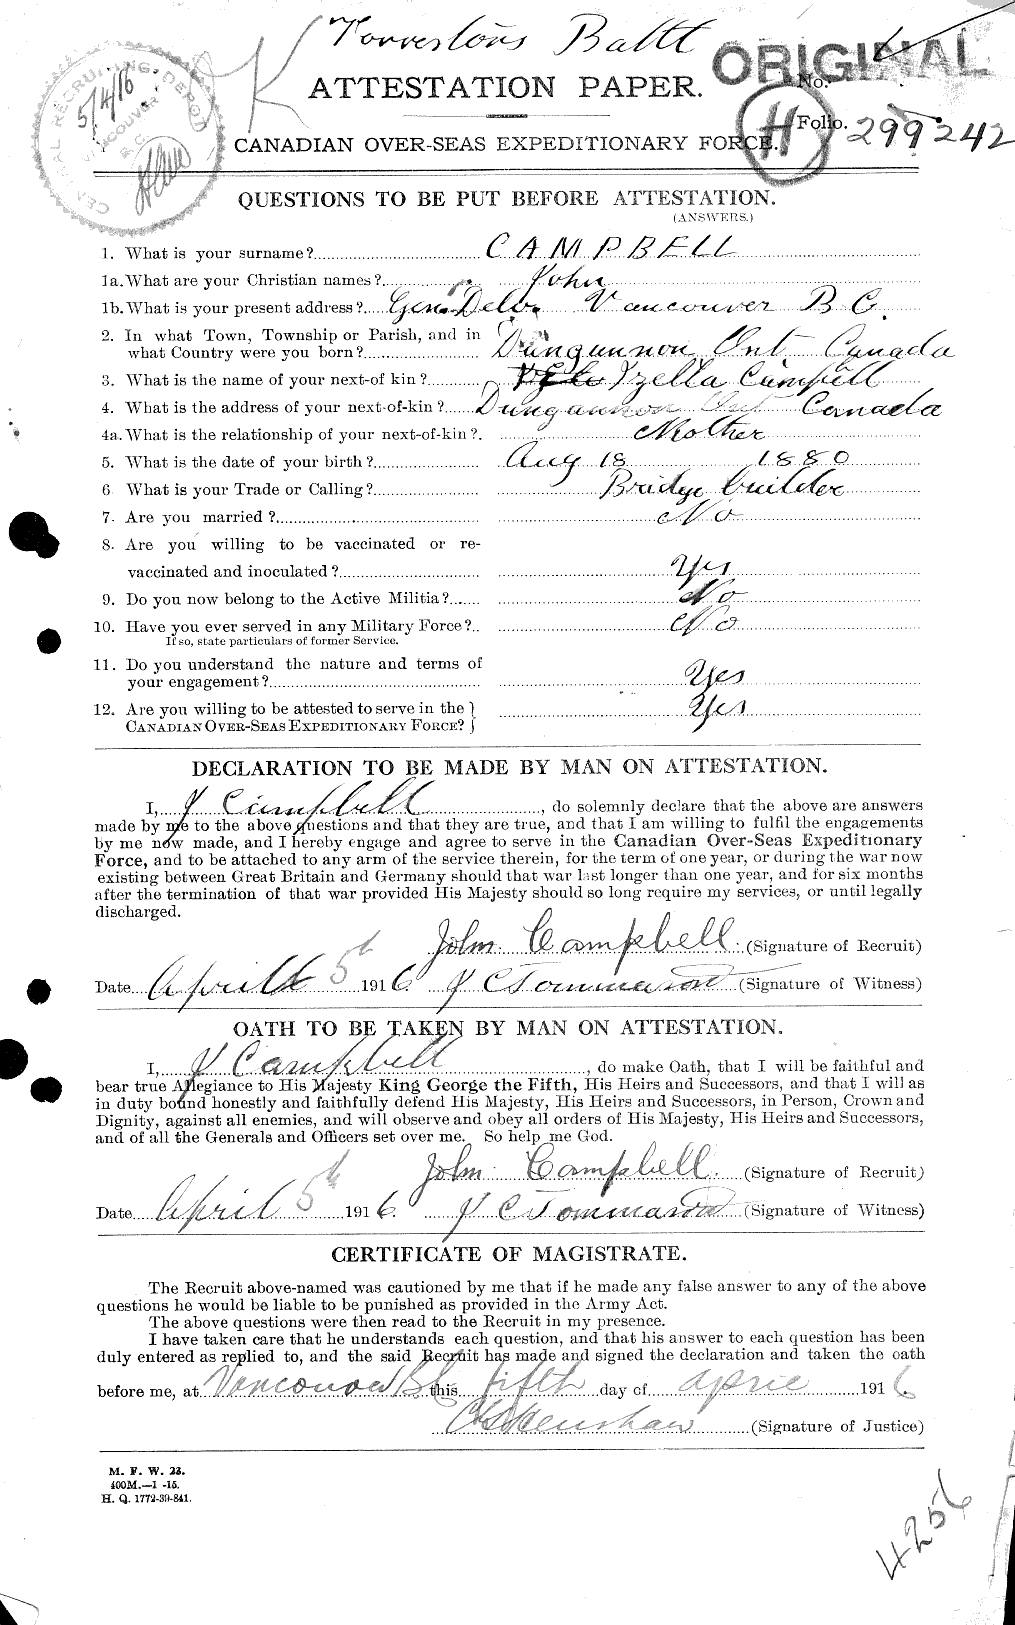 Personnel Records of the First World War - CEF 006824a